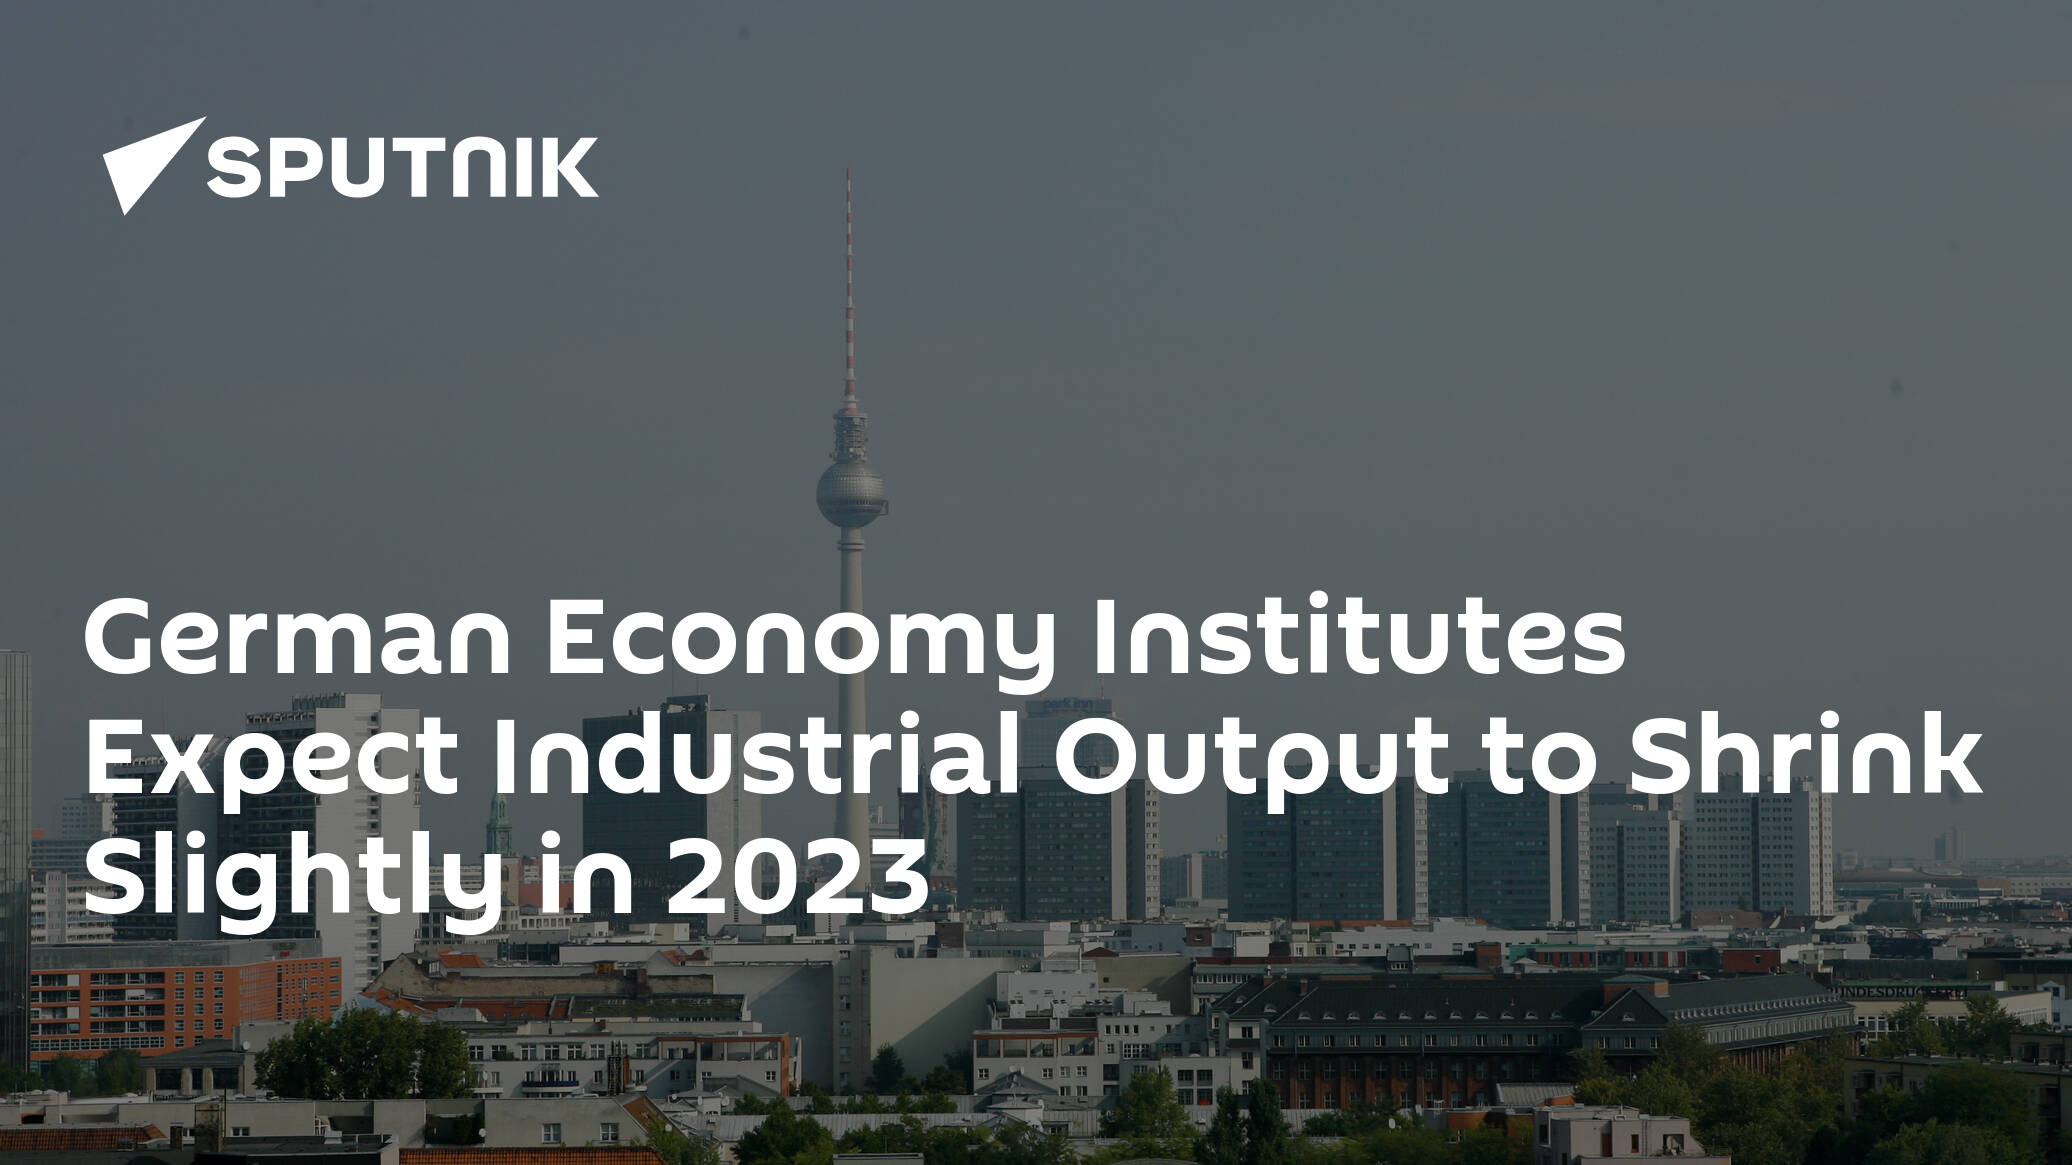 German Economy Institutes Expect Industrial Output to Shrink Slightly in 2023